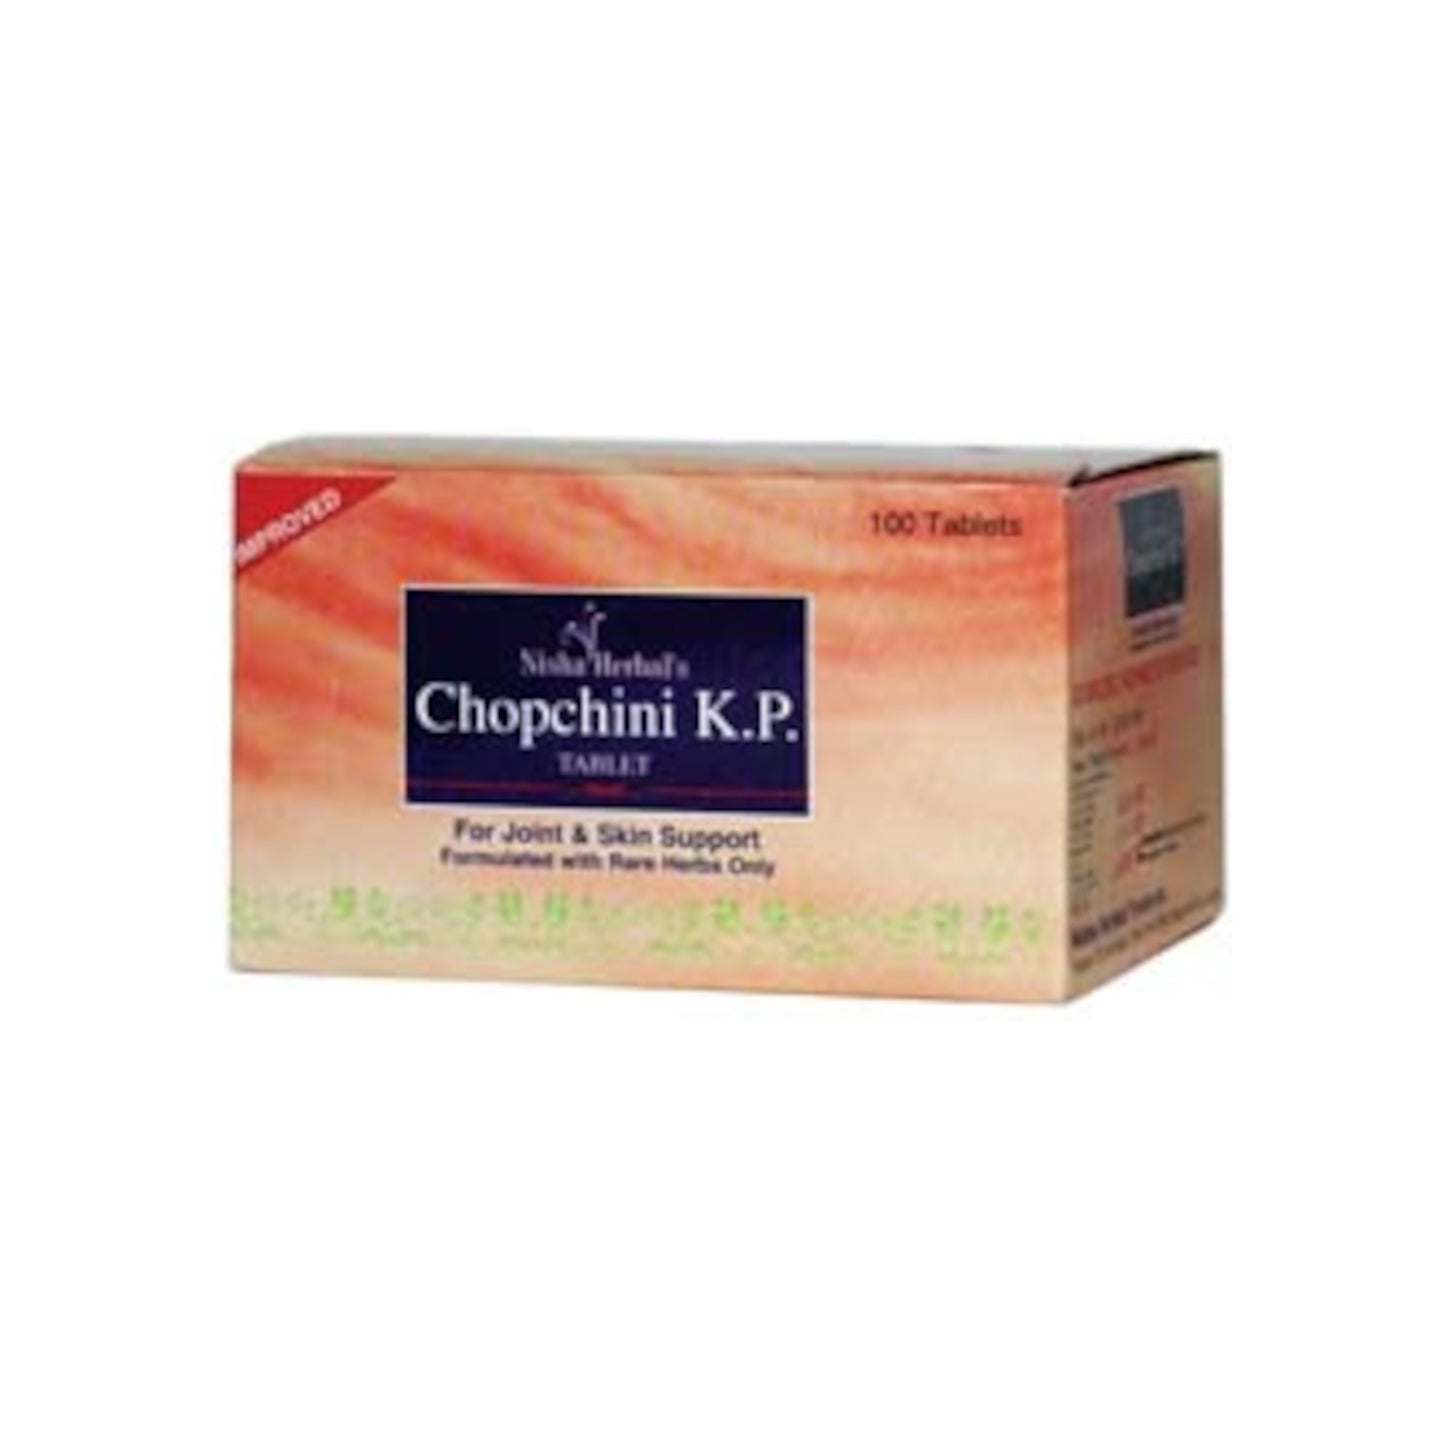 Image: Nisha Herbals - Chopchini K.P. 60 Tablets - Joint and skin support with rare herbs.